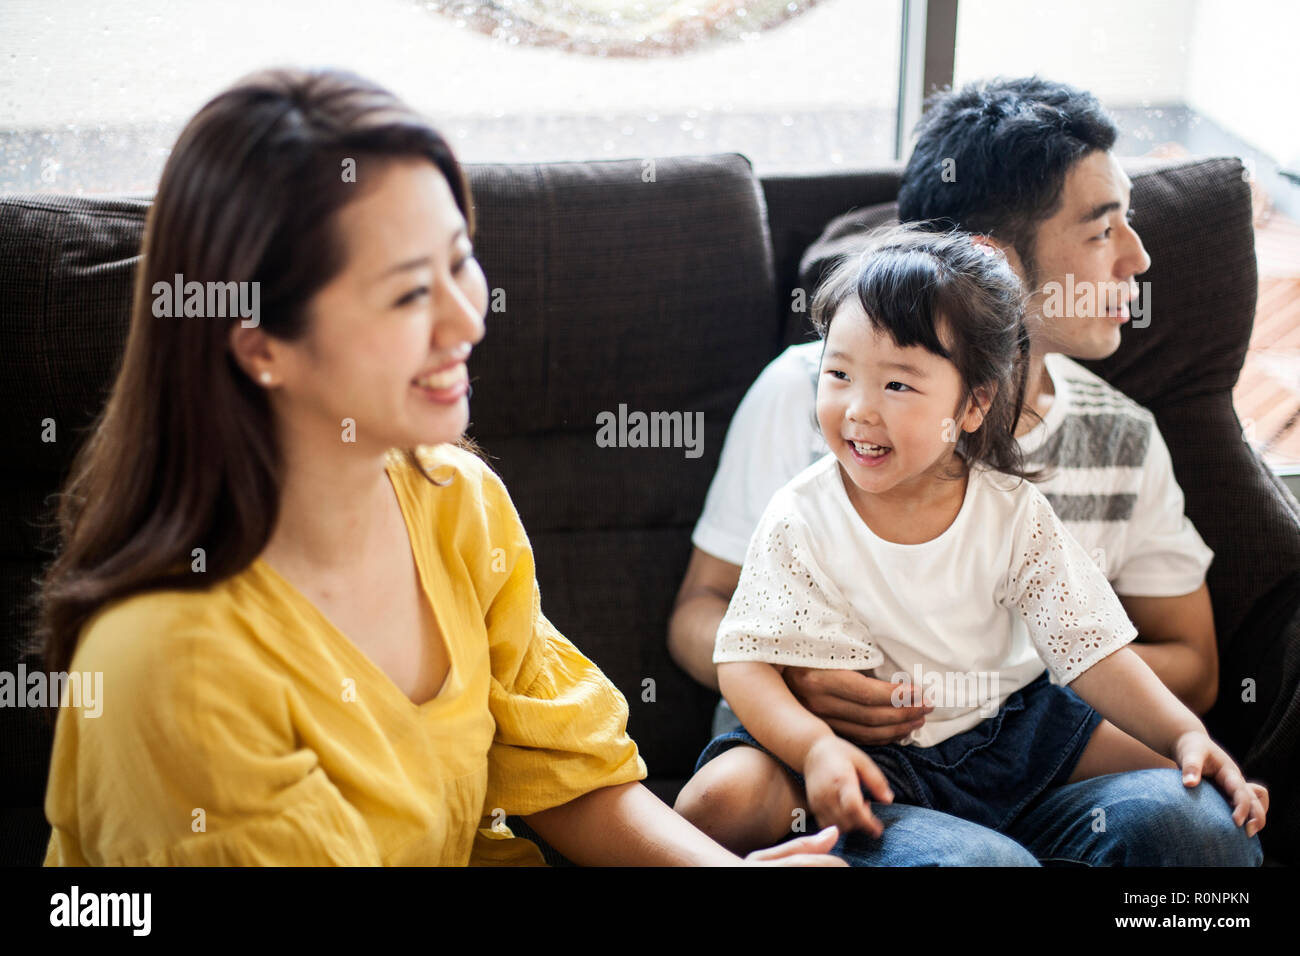 Portrait of smiling Japanese man, woman and young girl sitting on a sofa. Stock Photo